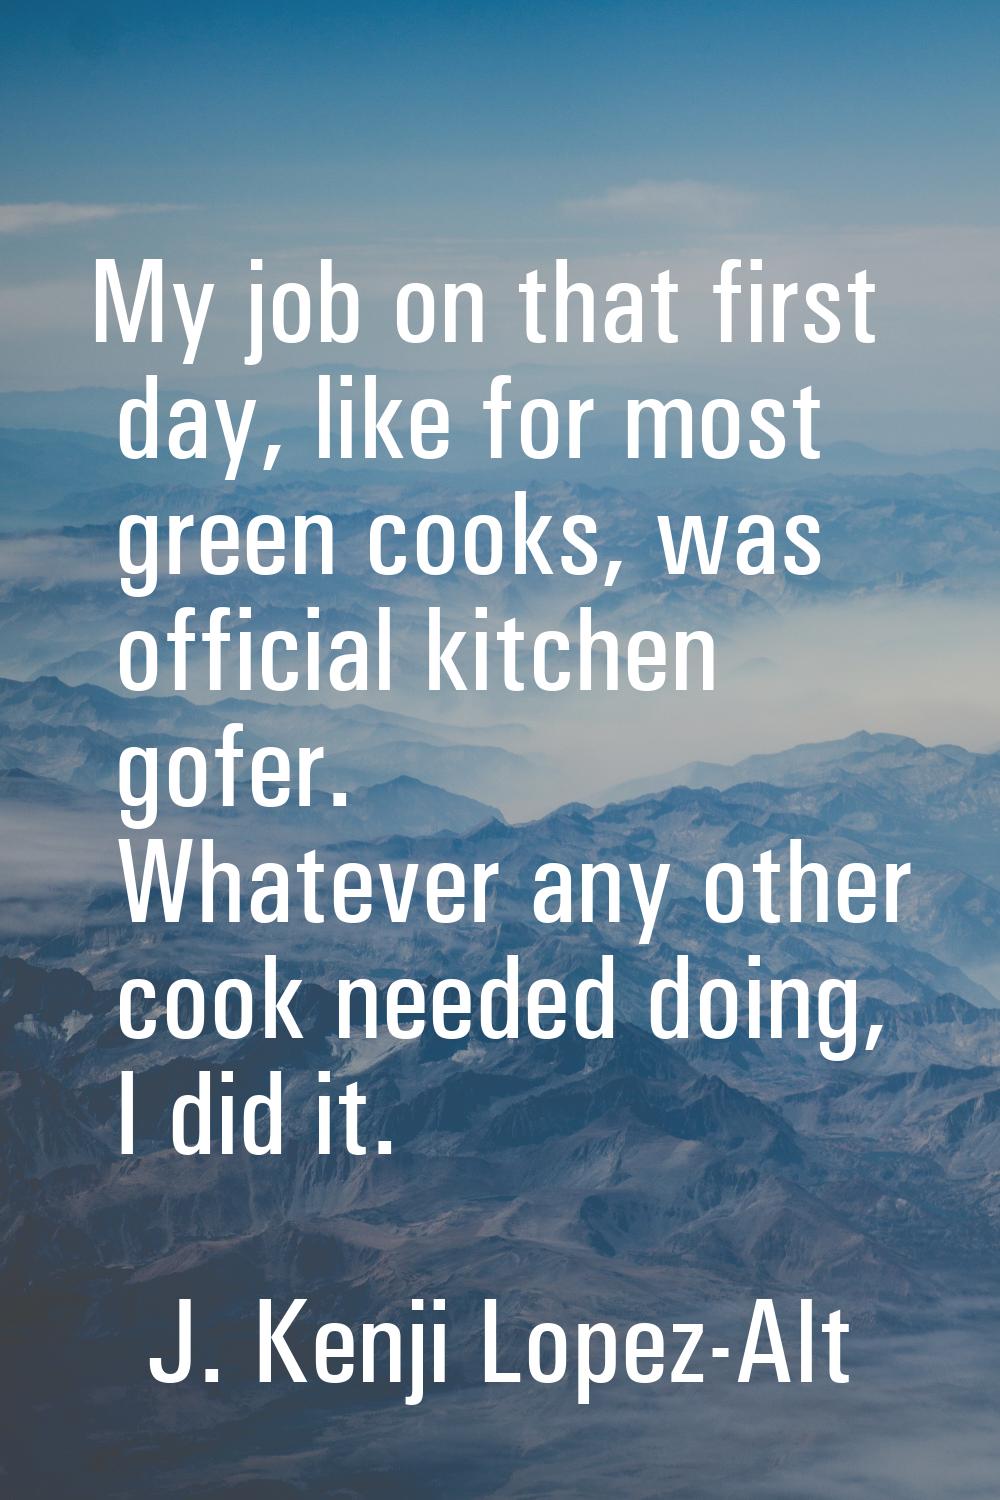 My job on that first day, like for most green cooks, was official kitchen gofer. Whatever any other